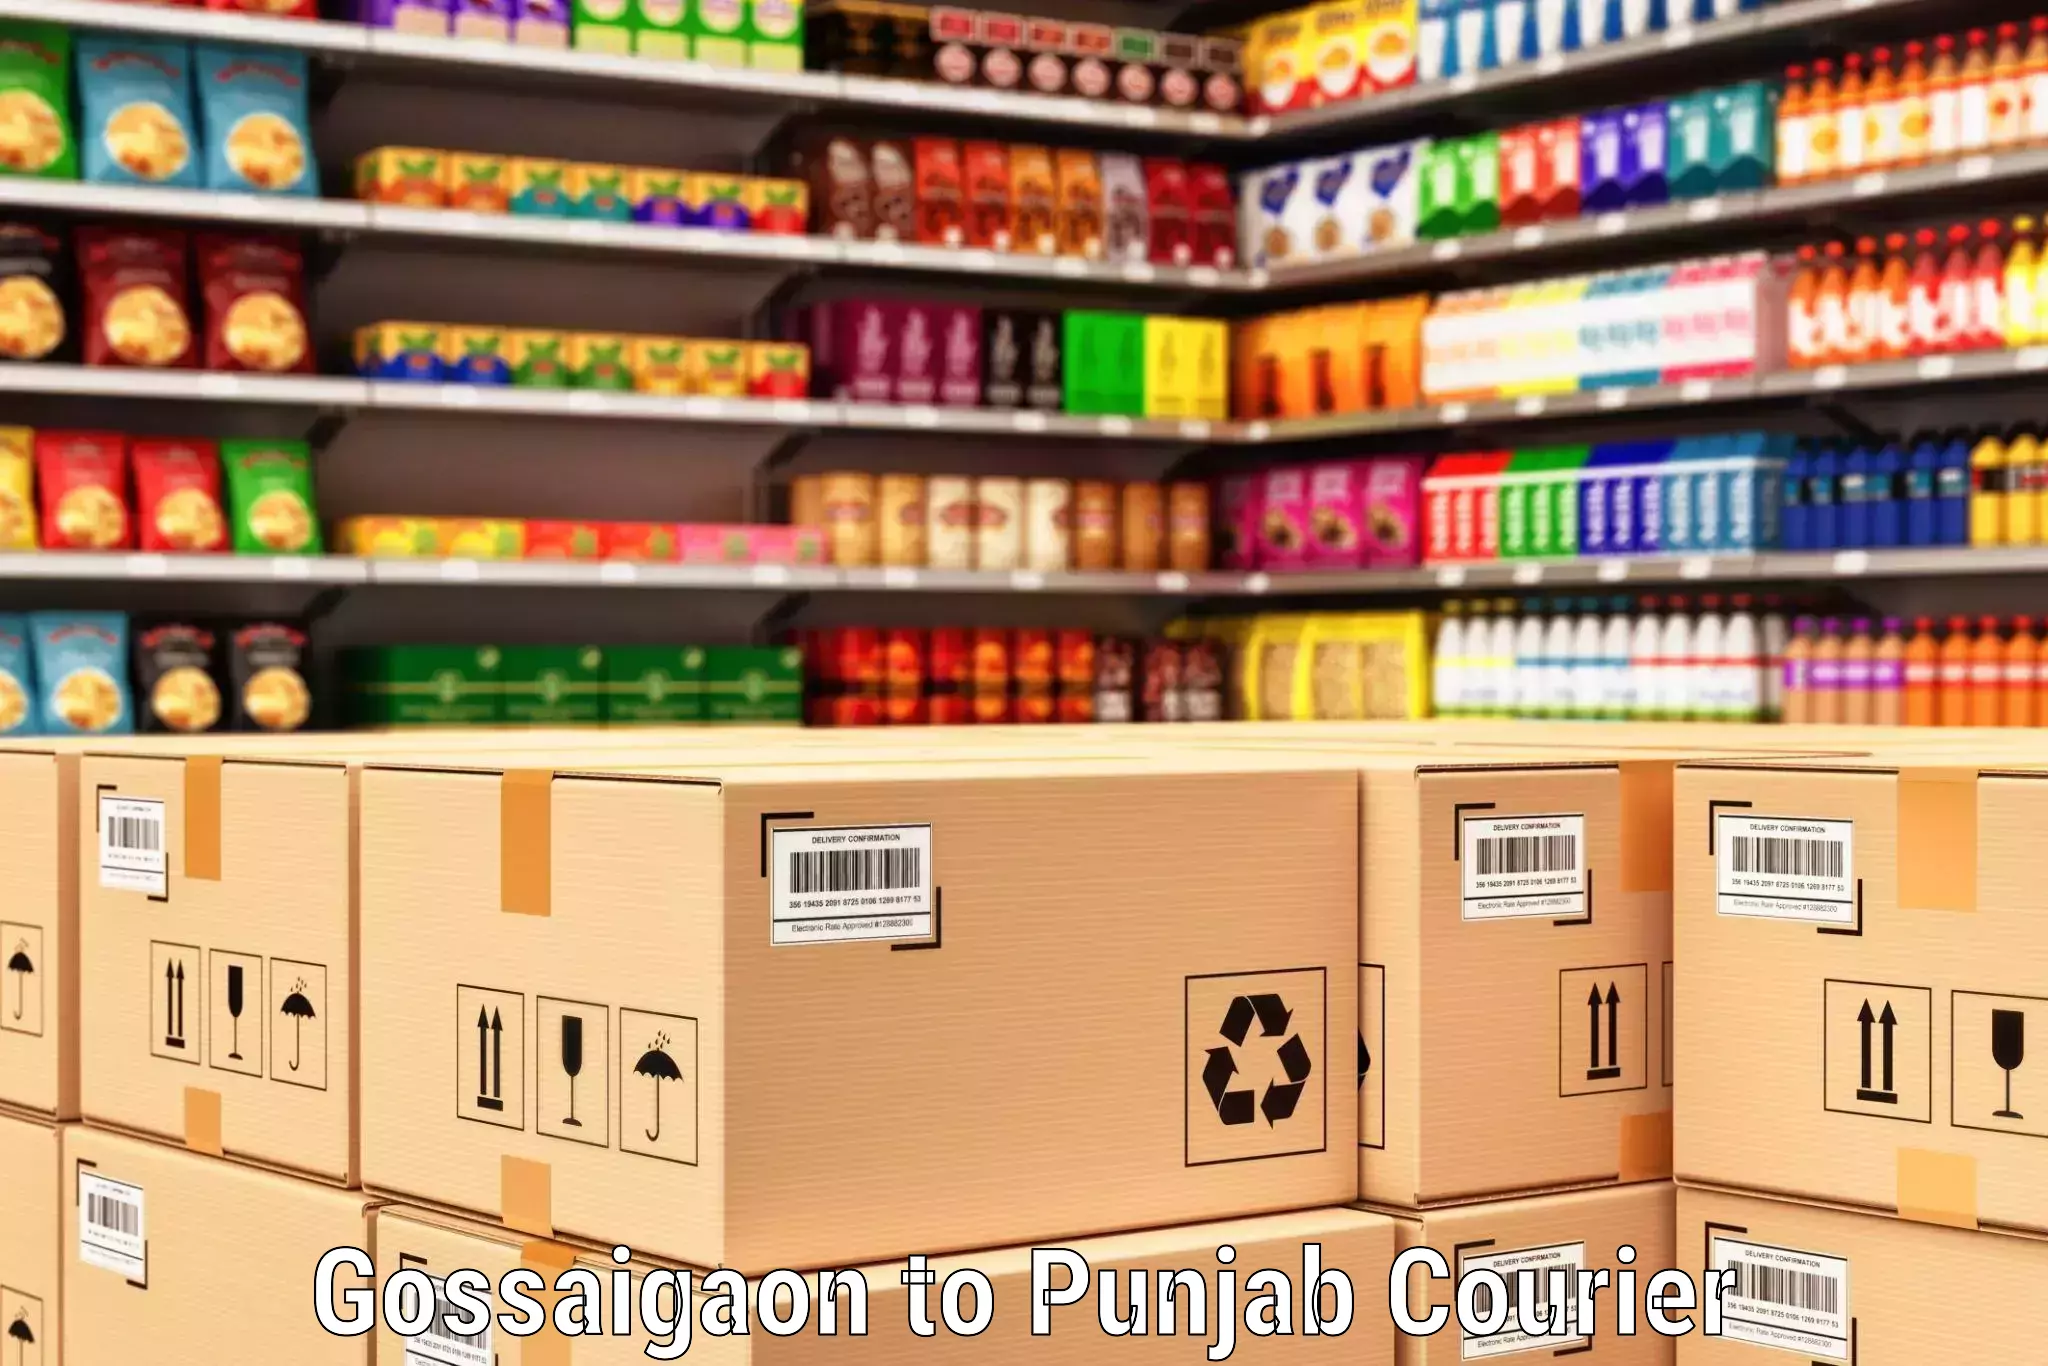 Professional parcel services Gossaigaon to Begowal